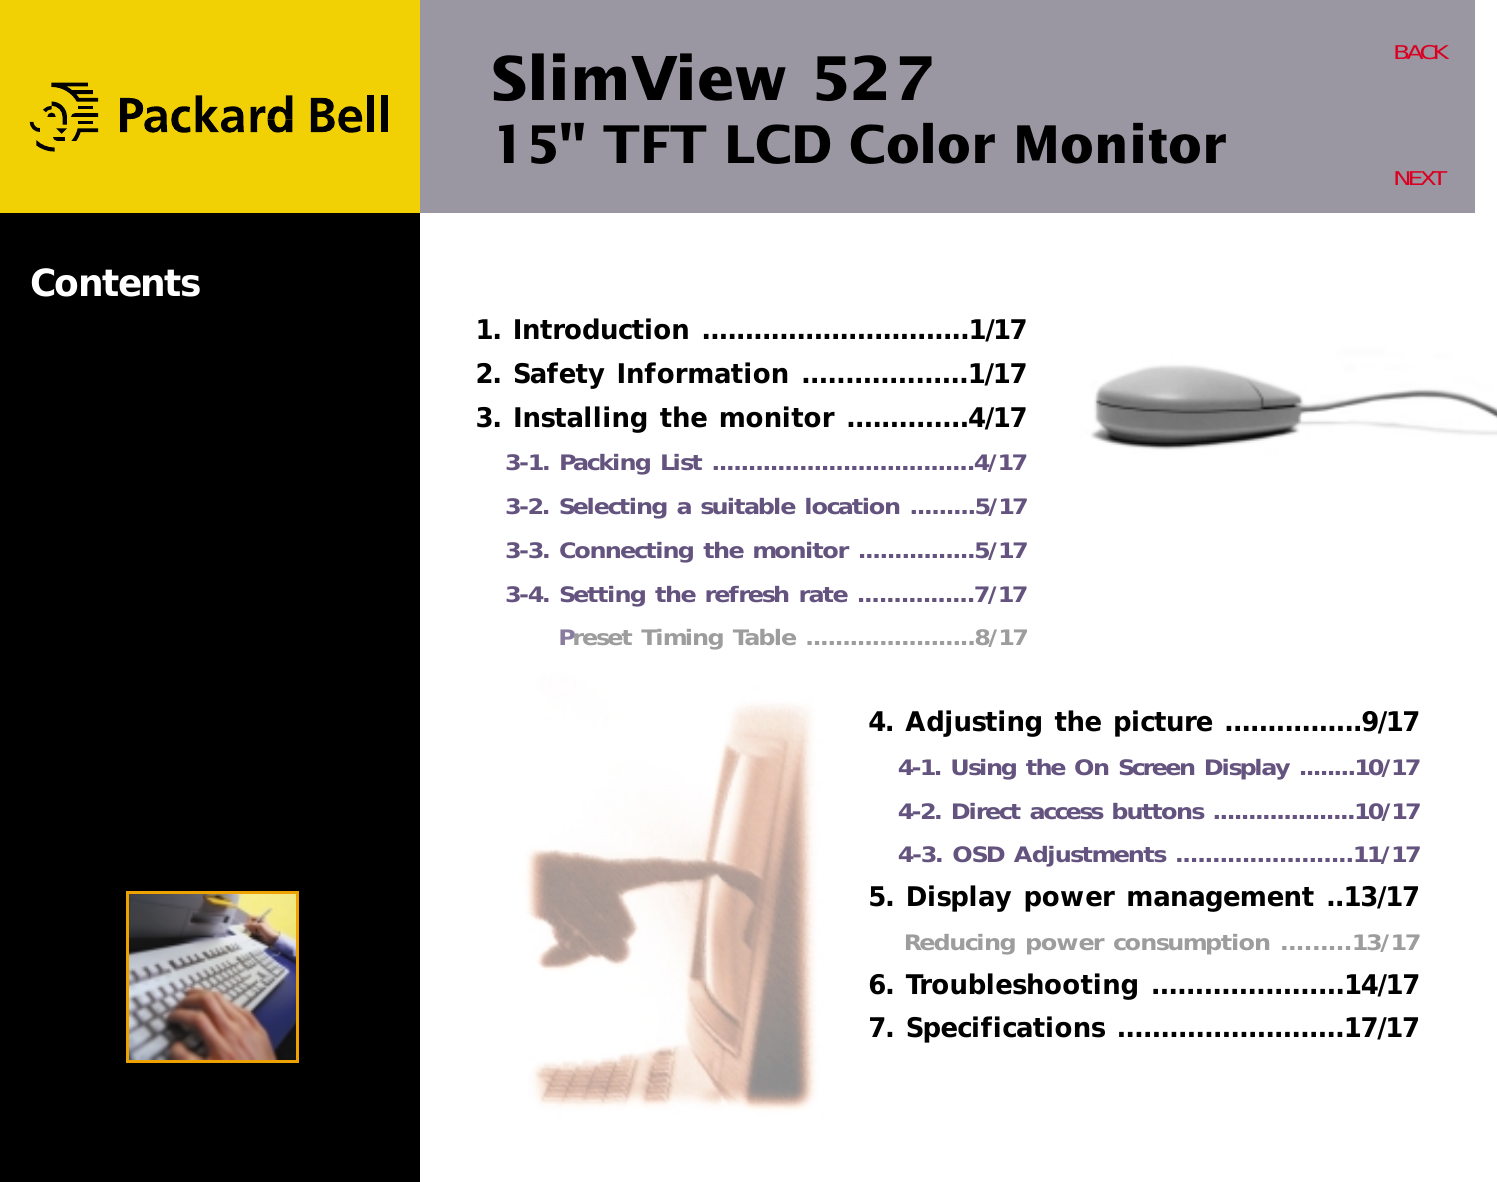 SlimView 52715&quot; TFT LCD Color MonitorBACKNEXTContents4. Adjusting the picture ................9/174-1. Using the On Screen Display ........10/174-2. Direct access buttons ....................10/174-3. OSD Adjustments ........................11/175. Display power management ..13/17Reducing power consumption .........13/176. Troubleshooting ......................14/177. Specifications ..........................17/171. Introduction ...............................1/172. Safety Information ...................1/173. Installing the monitor ..............4/173-1. Packing List ....................................4/173-2. Selecting a suitable location .........5/173-3. Connecting the monitor ................5/173-4. Setting the refresh rate ................7/17Preset Timing Table .......................8/17